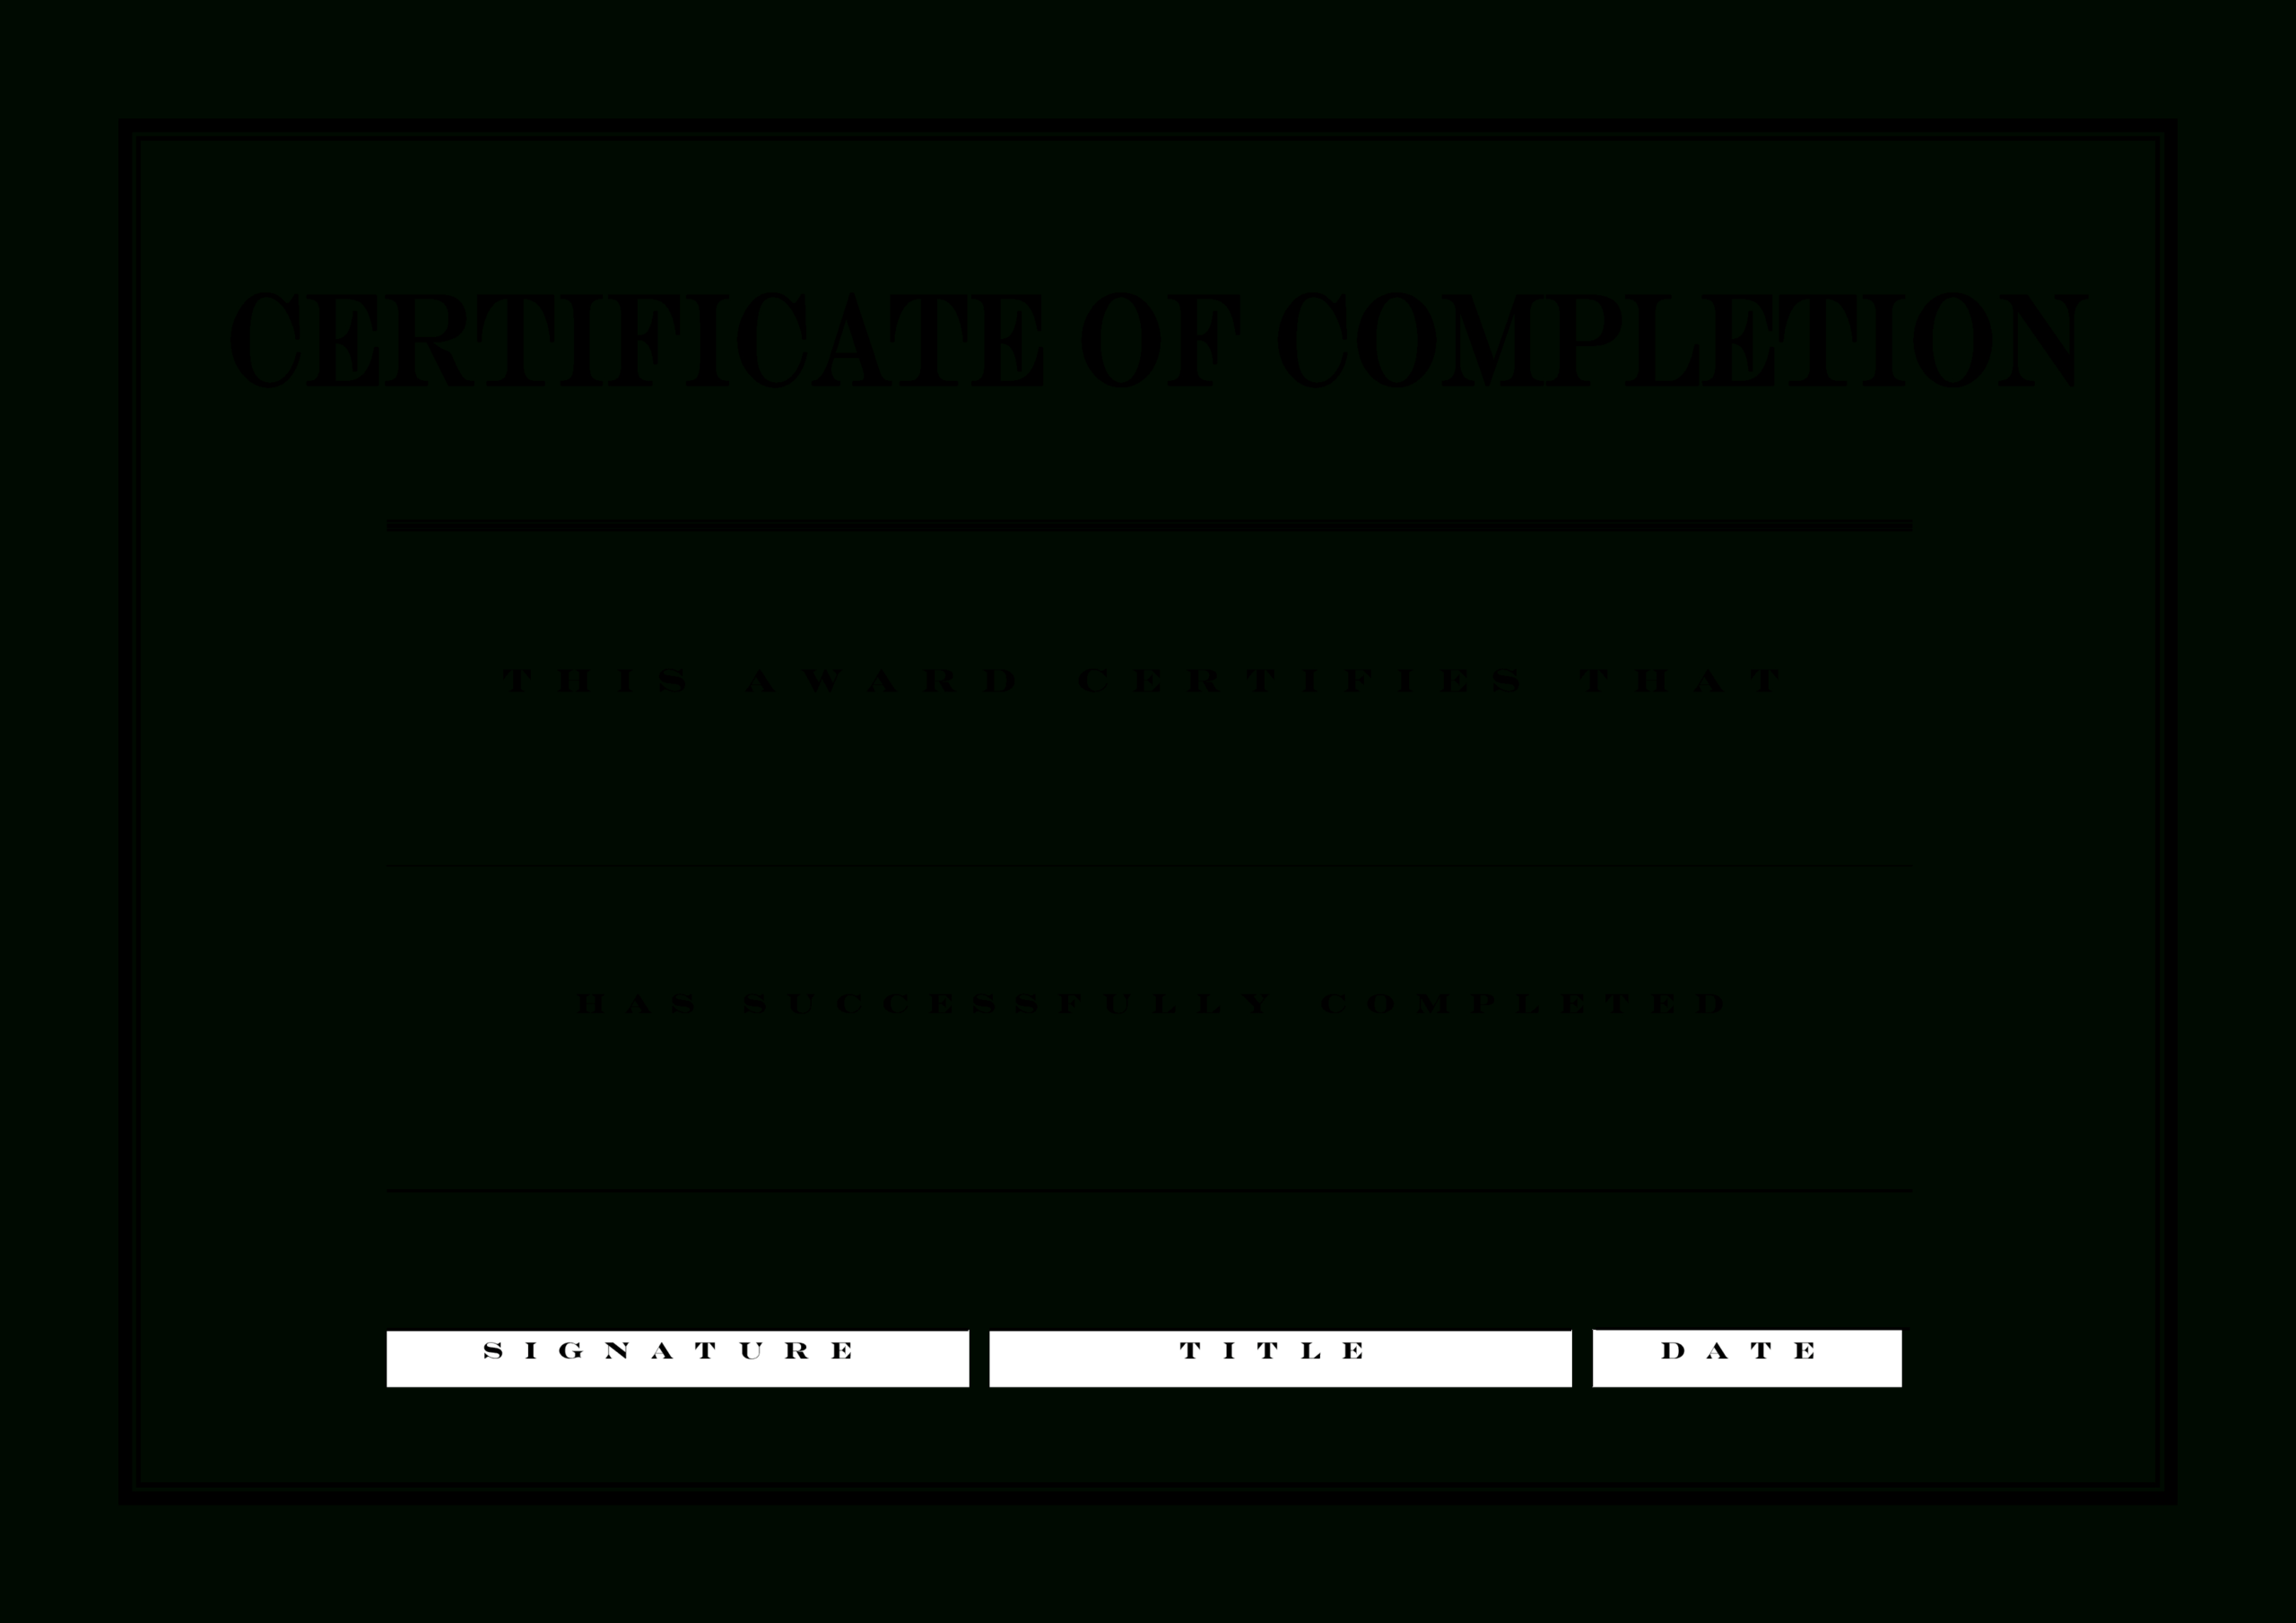 Certificate Of Completion | Templates At Allbusinesstemplates Within Blank Certificate Of Achievement Template